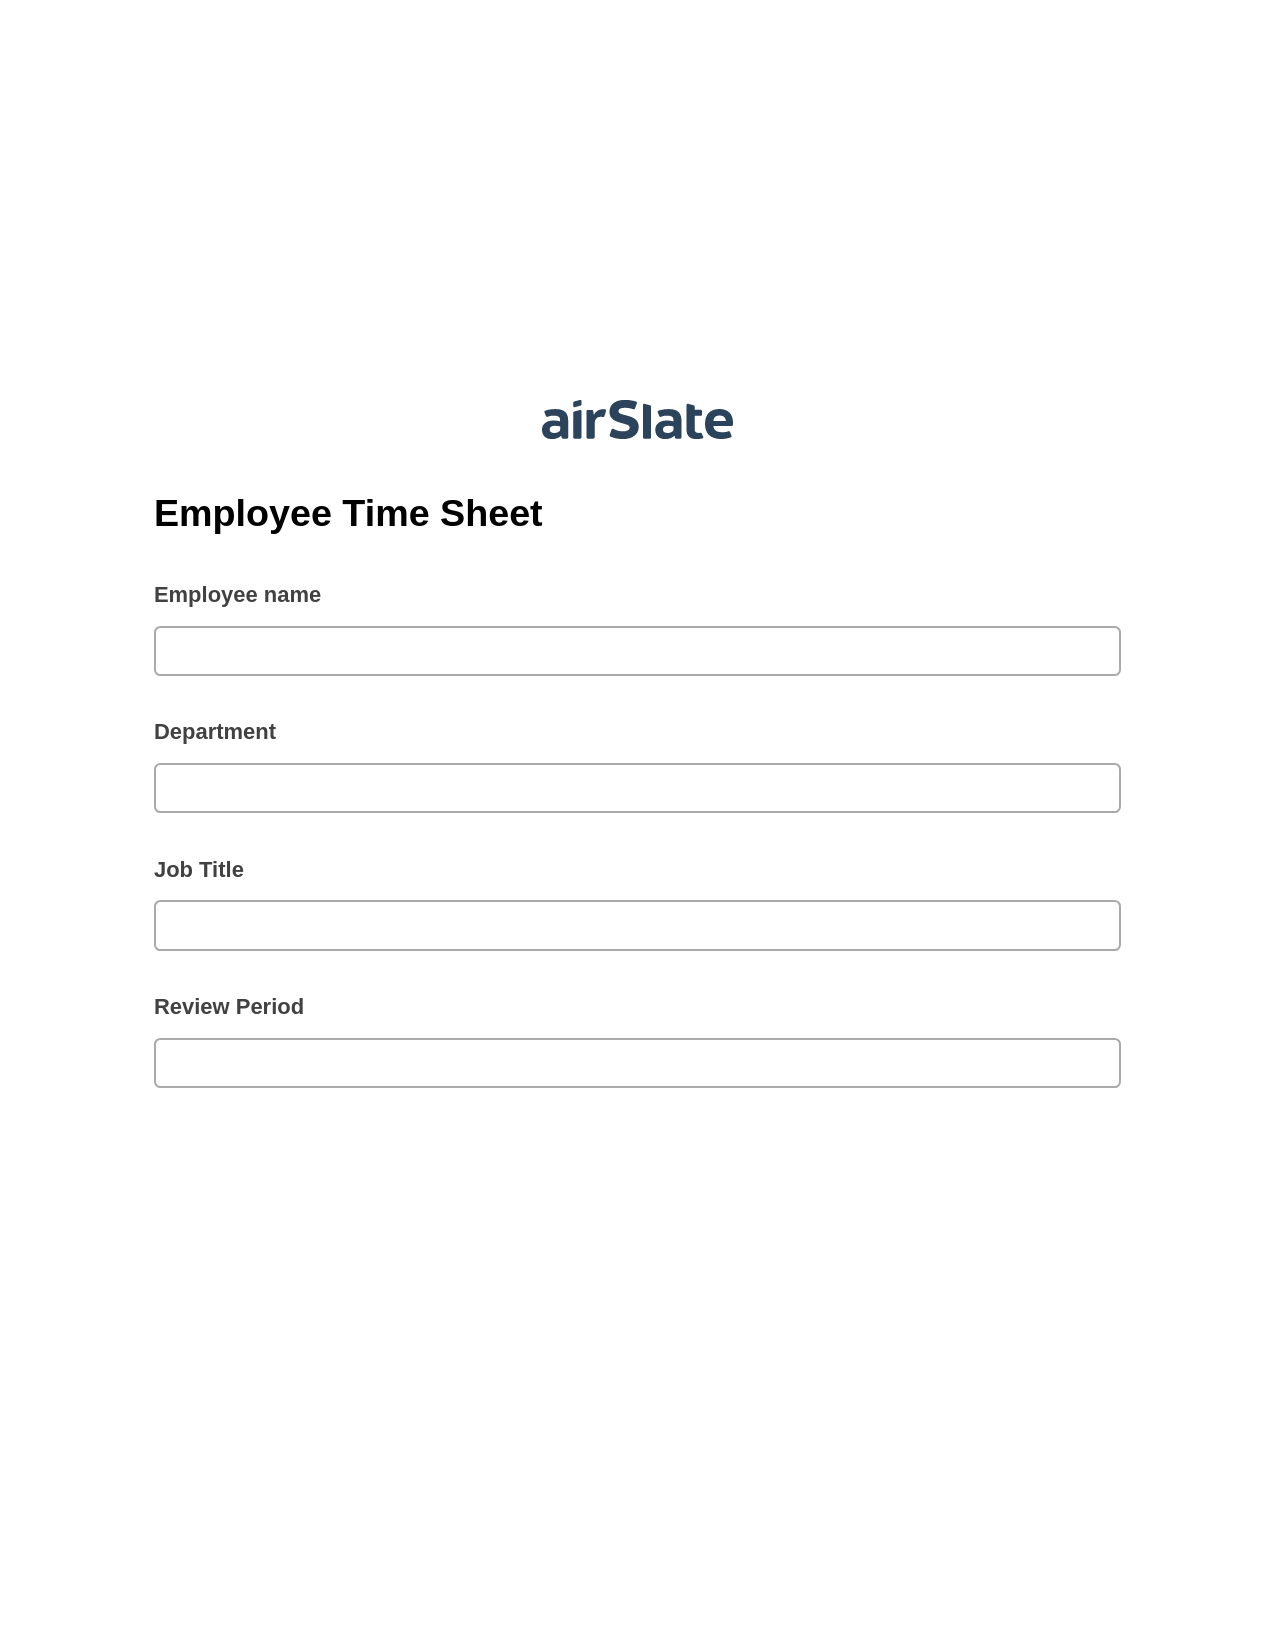 Employee Time Sheet Prefill from NetSuite records, Create slate addon, Archive to Dropbox Bot